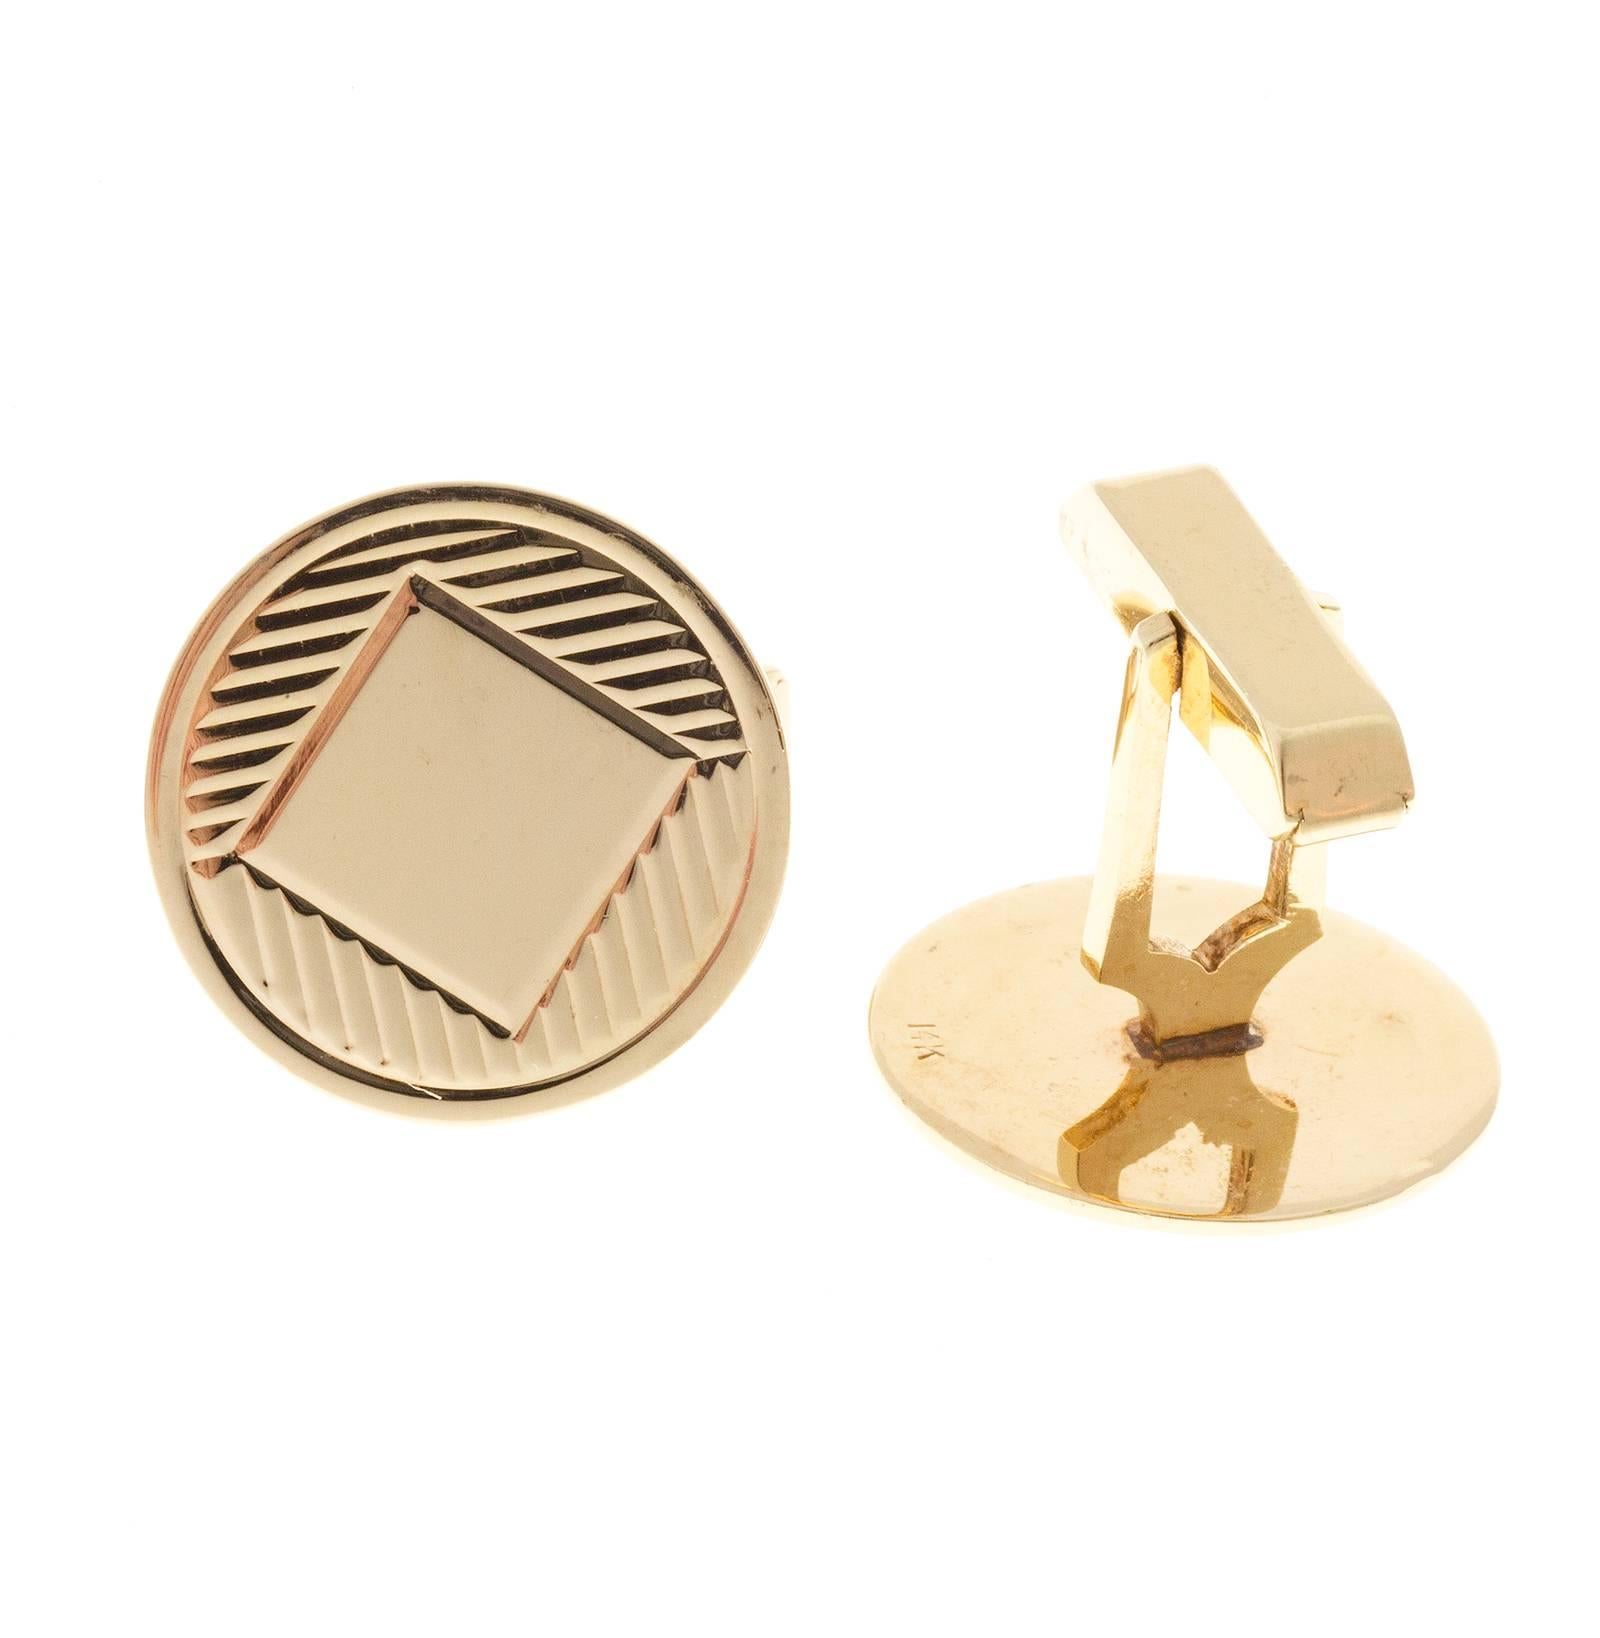  Gold Textured Smooth Round Clip Back Cufflinks In Good Condition For Sale In Stamford, CT